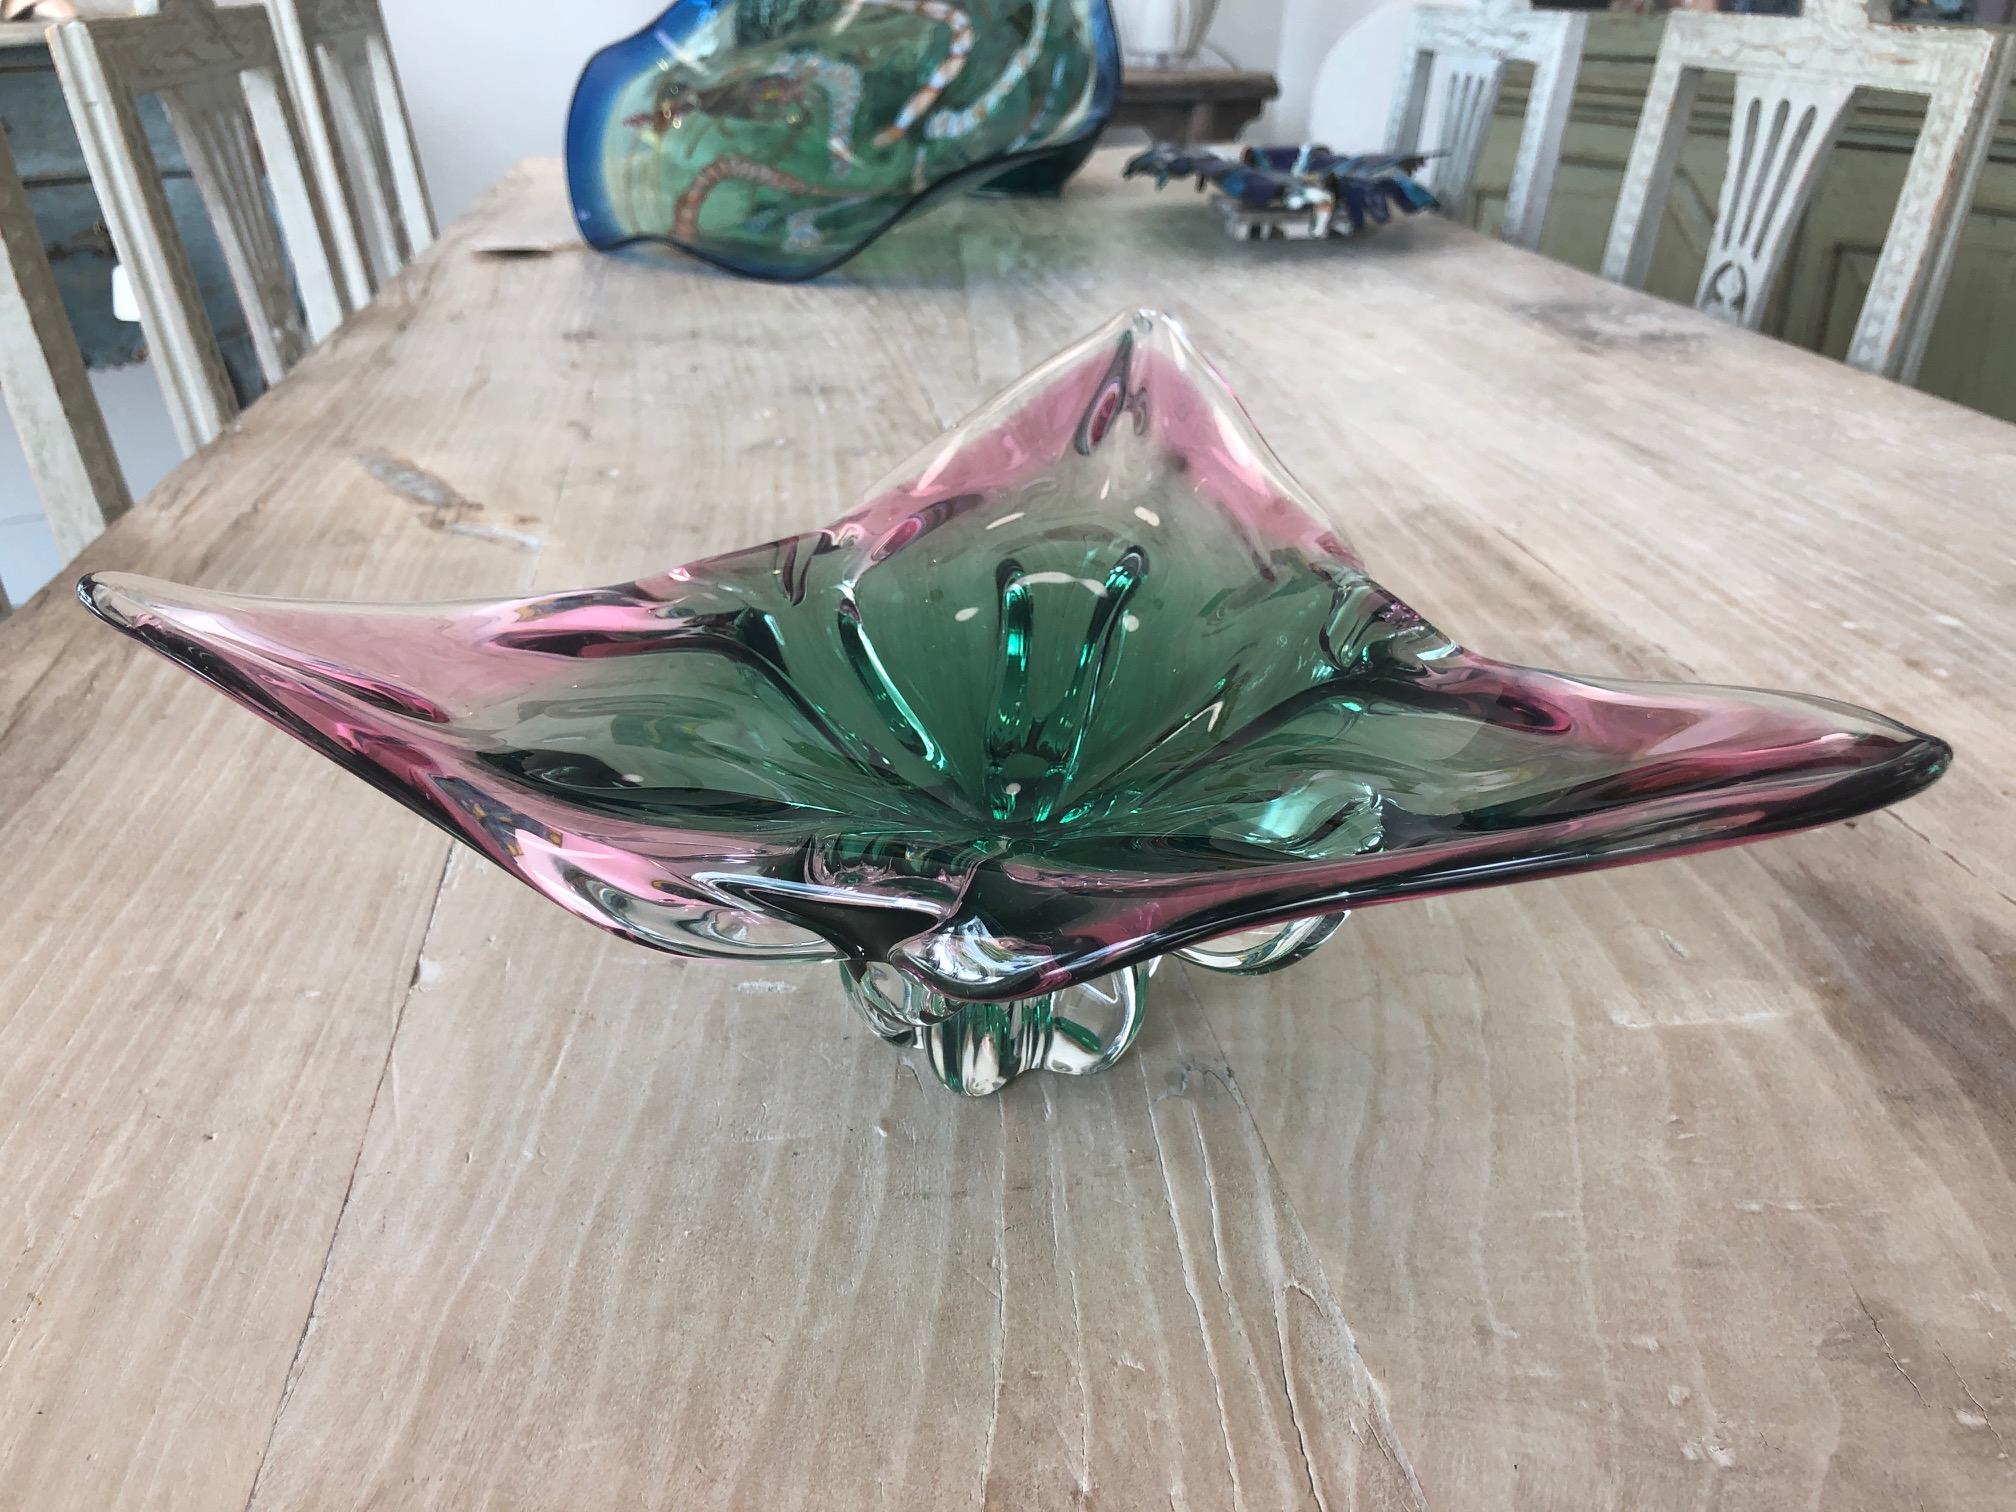 Heavy signed Murano glass bowl. Triangle-shaped with vibrant pastel green and pink hues throughout, circa 1960s.

The bowl measures (inches):
13